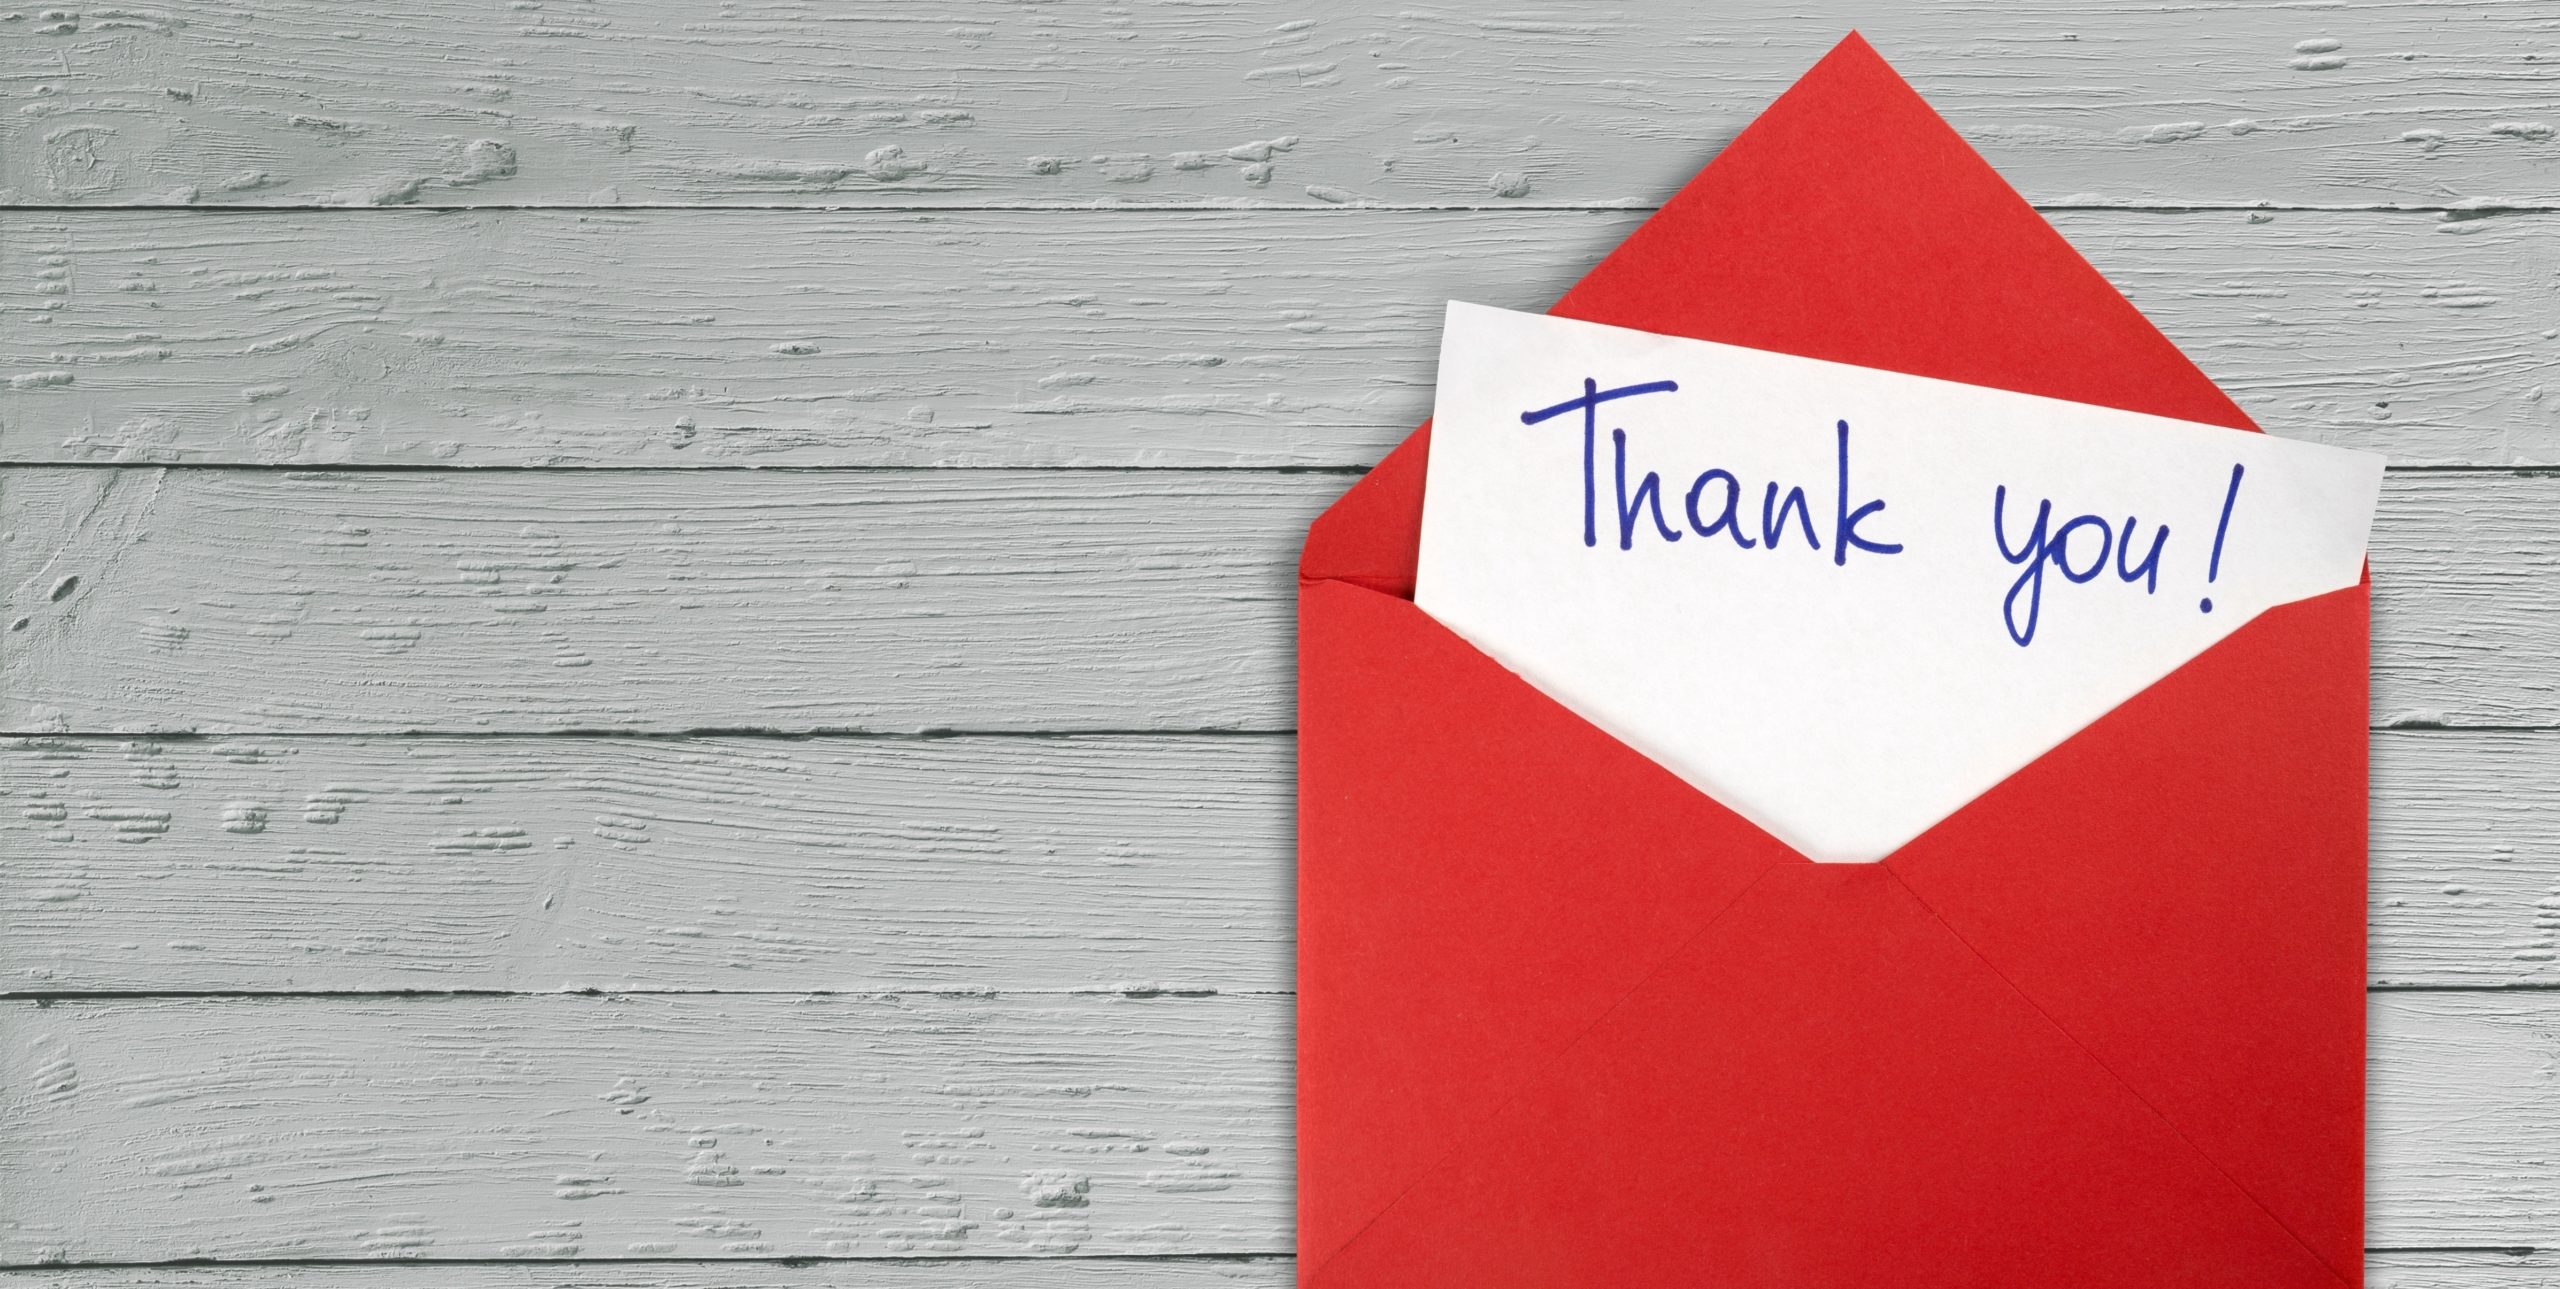 Six ways to show your appreciation for federal employees during Public